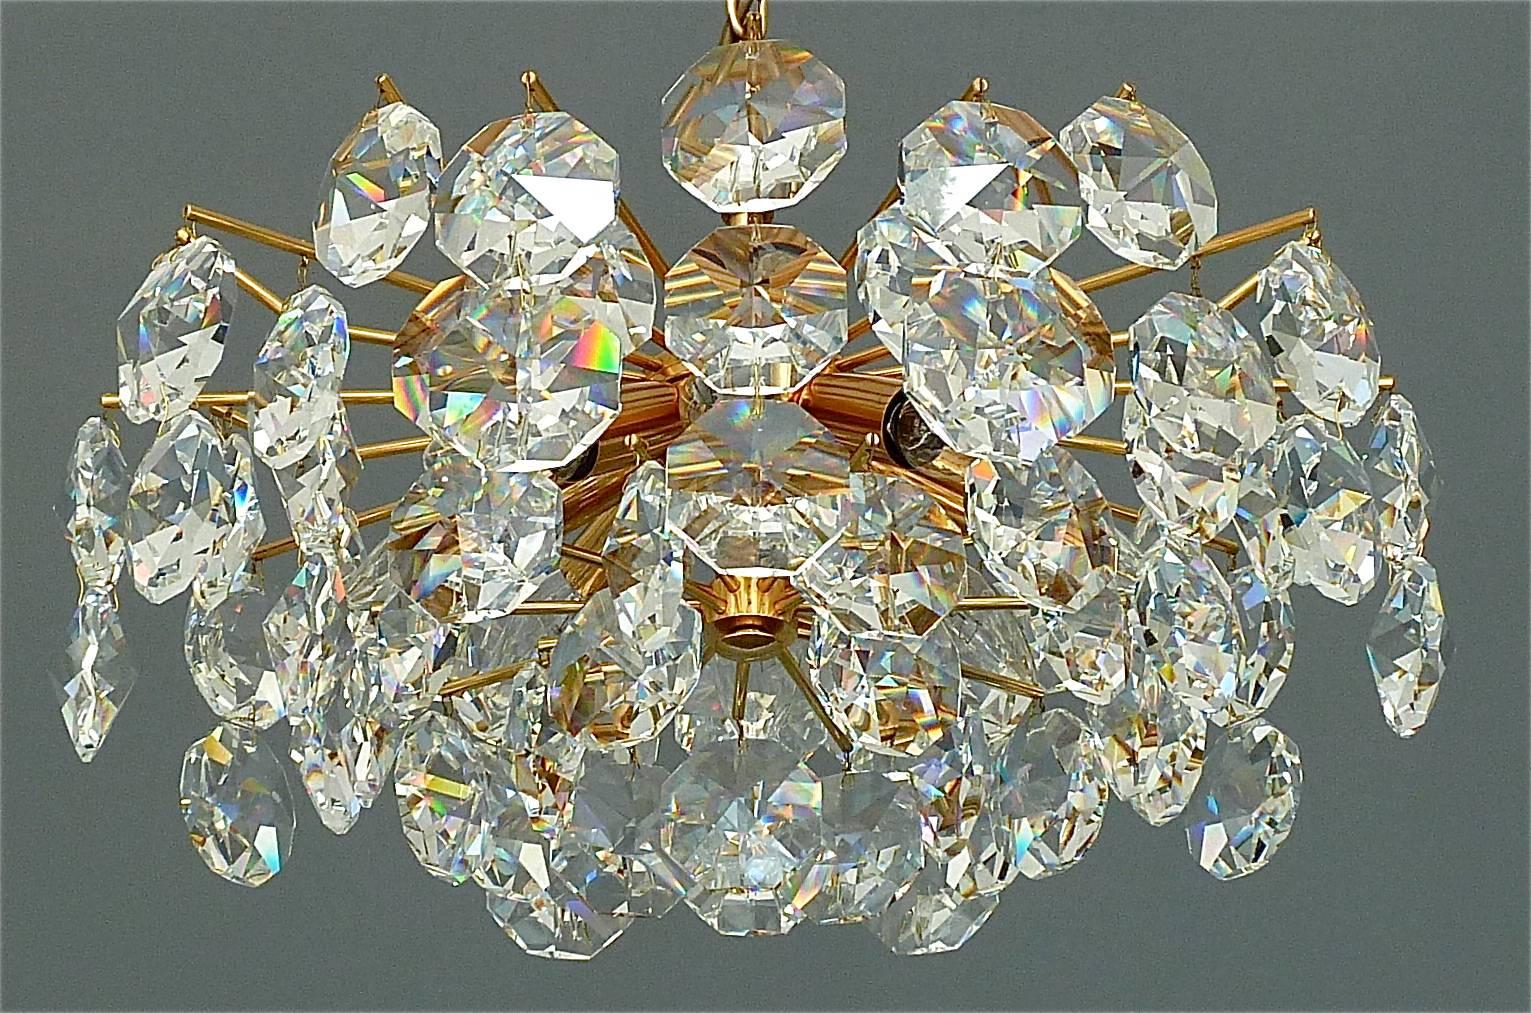 Noble gilt brass and crystal glass sputnik chandelier made by Palwa, Germany, circa 1960-1970. The chain-hanging length-adjustable chandelier has a gilt brass metal sputnik construction with lots of big octagonal high lead hand-cut faceted glass